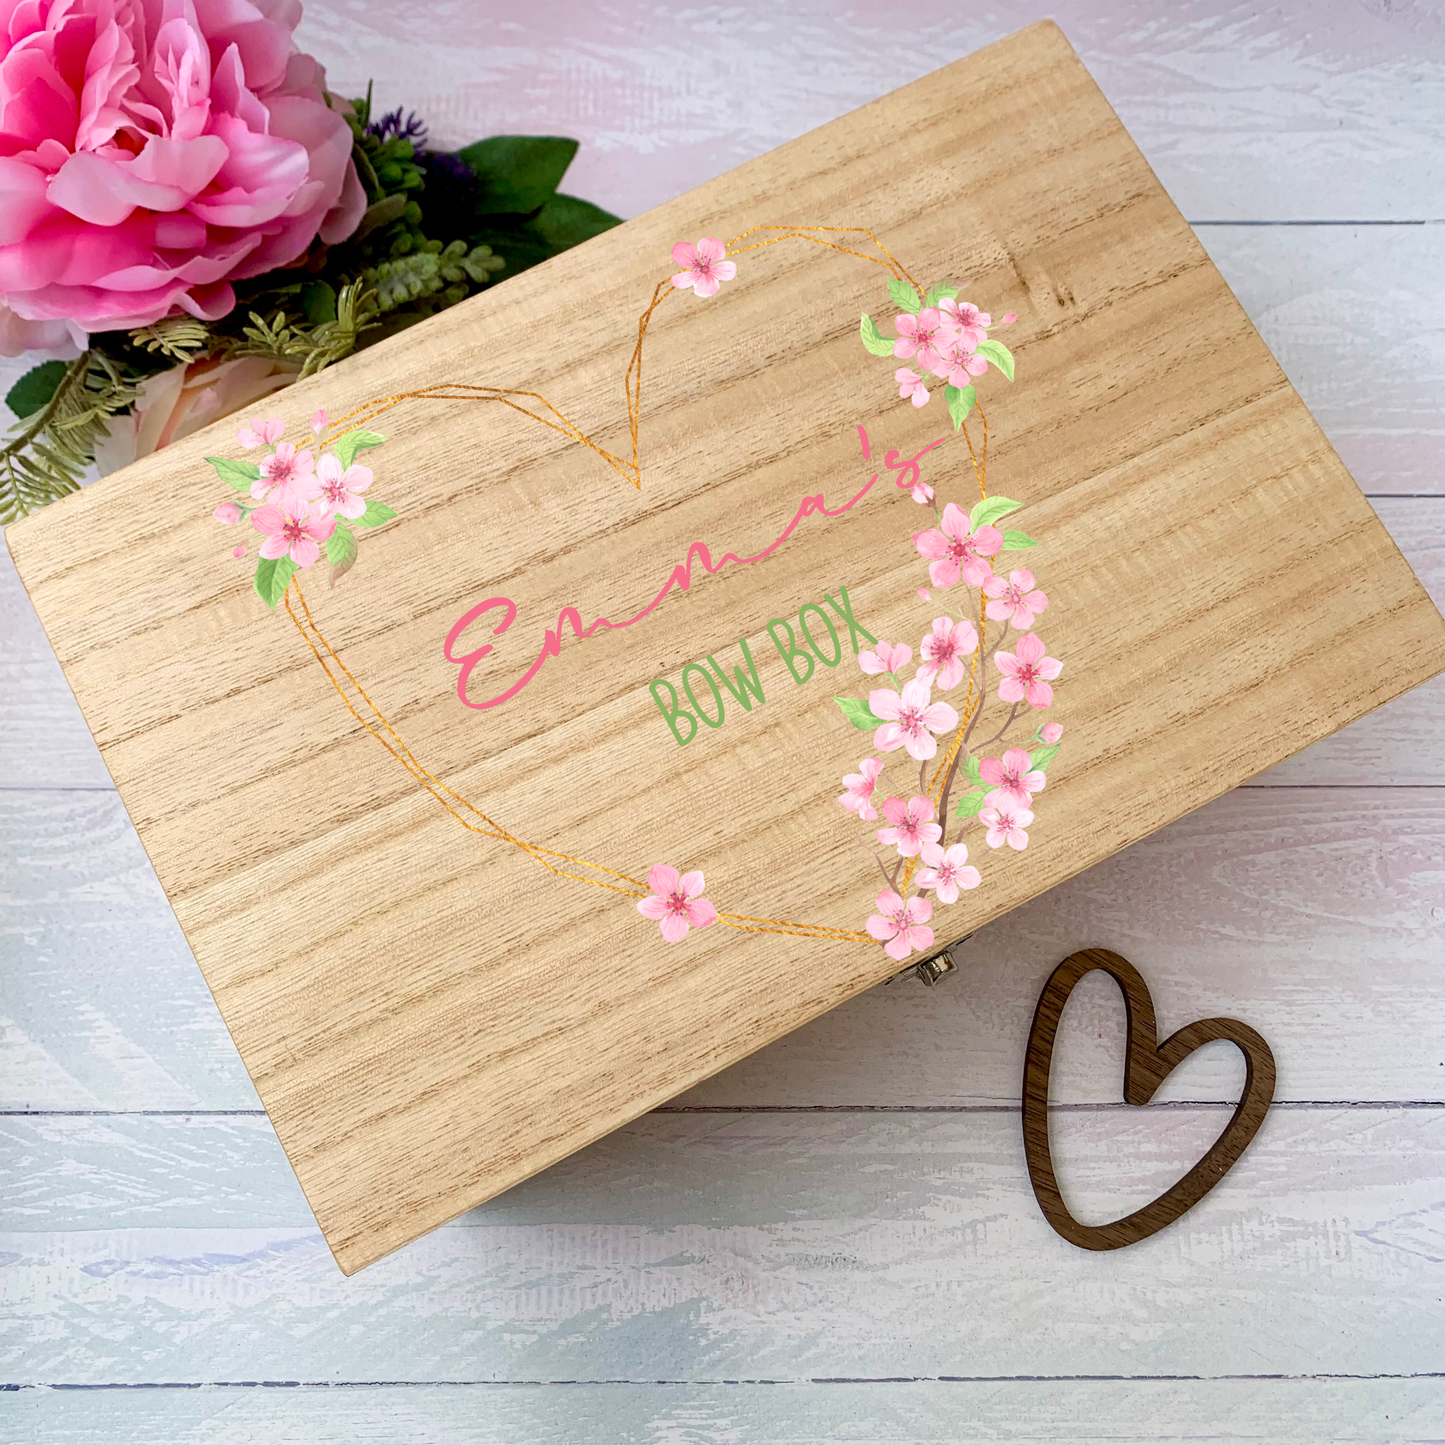 Blossom Bow Box, personalised wooden box